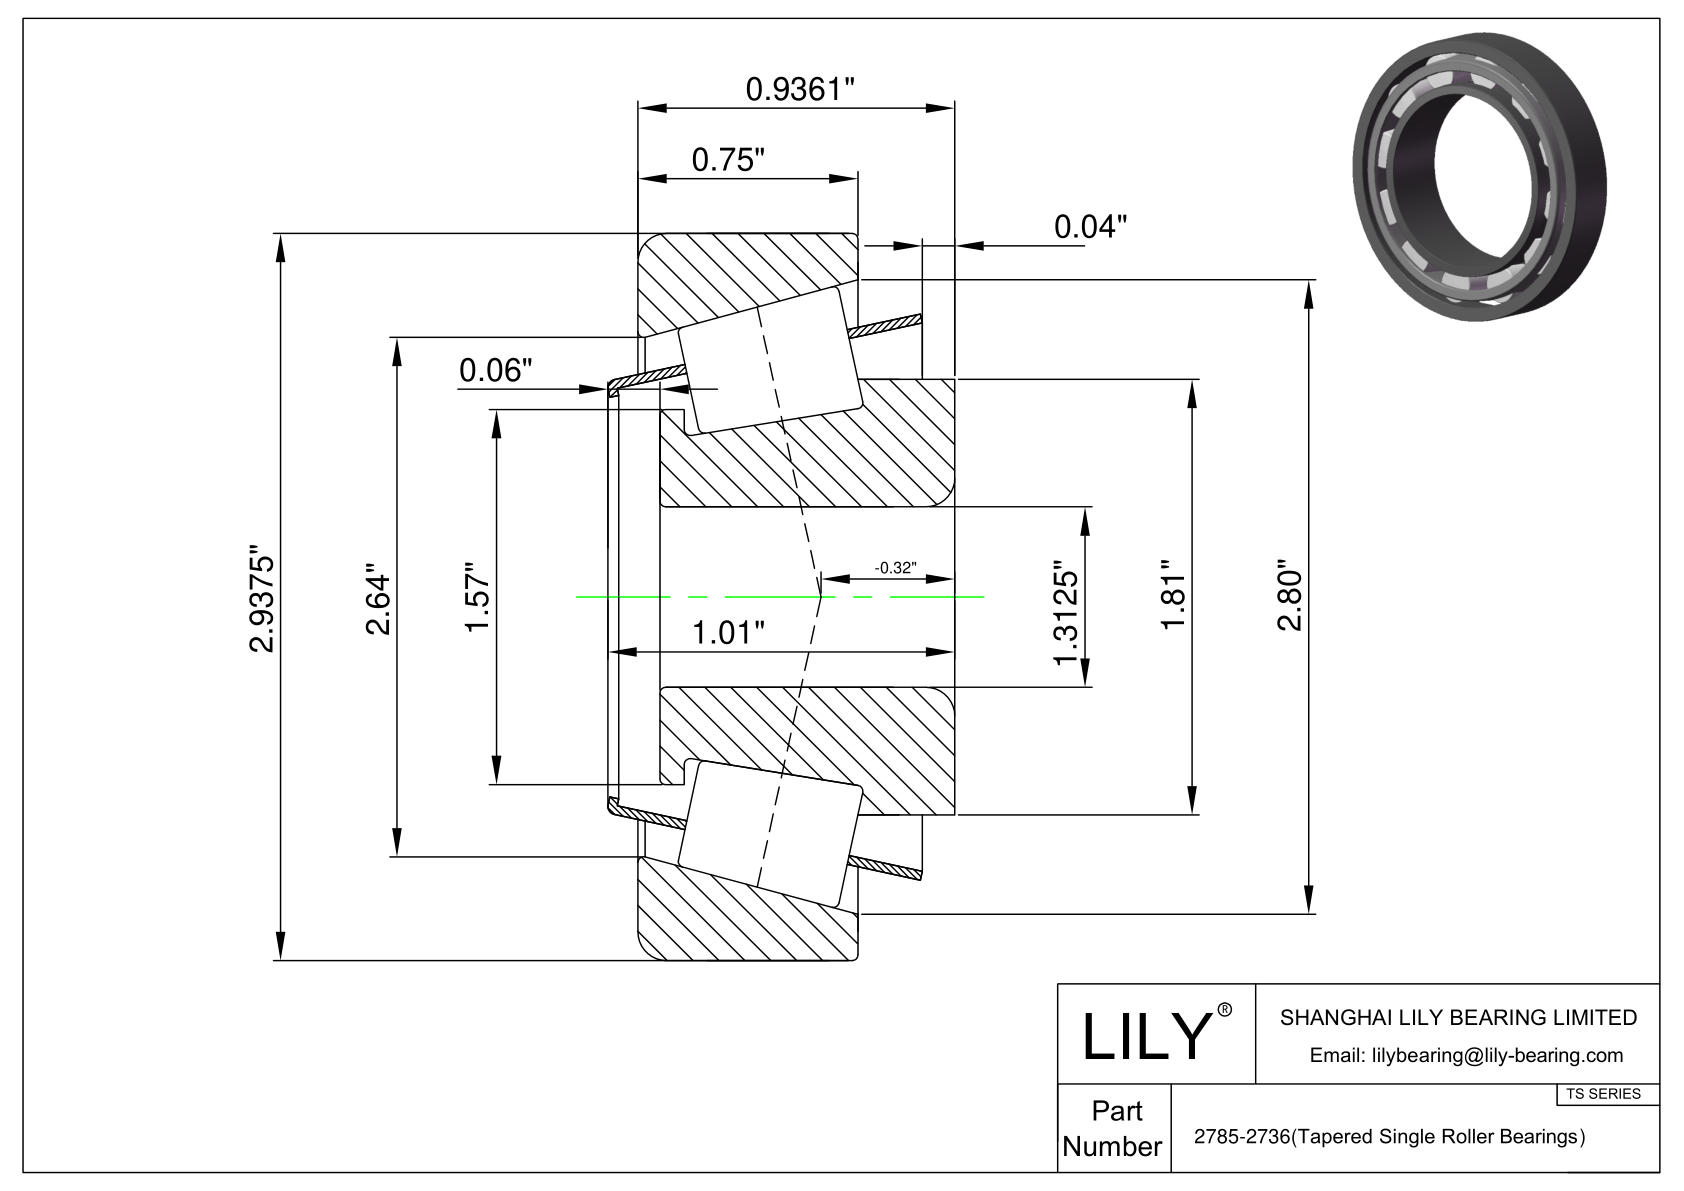 2785-2736 TS (Tapered Single Roller Bearings) (Imperial) cad drawing